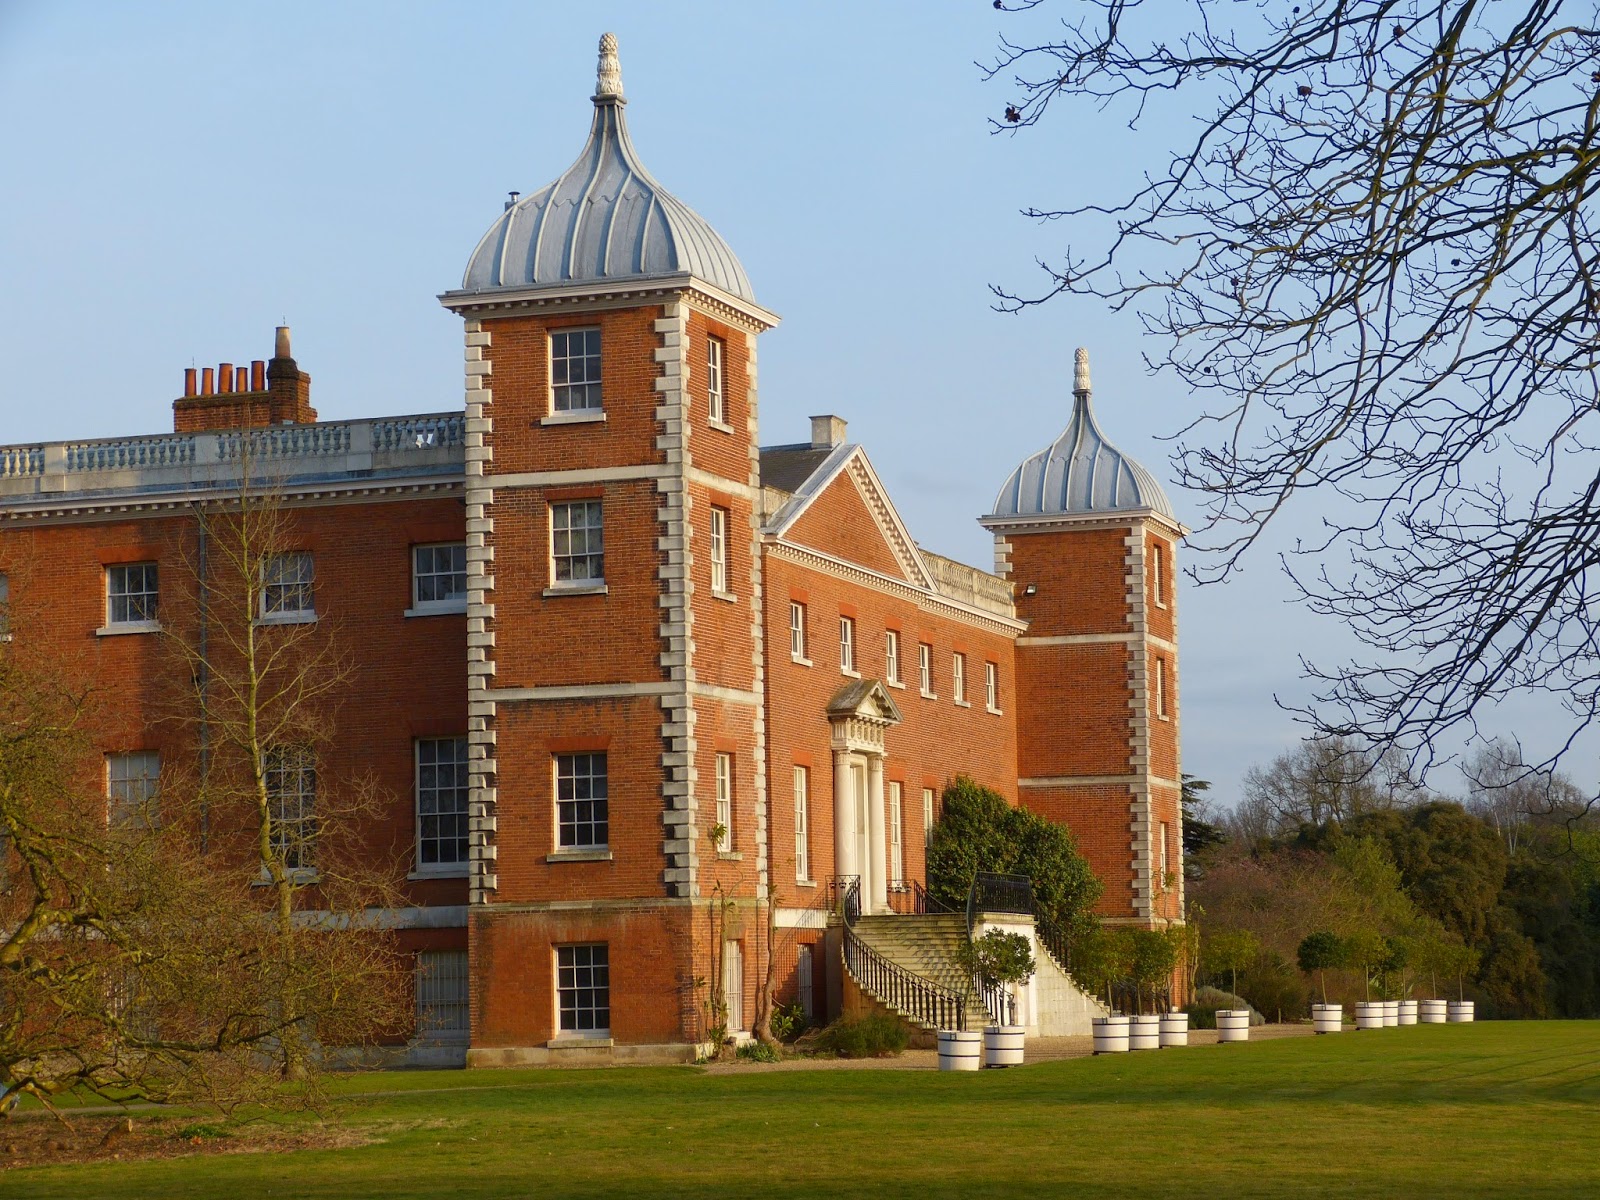 The rear view of the house, Osterley